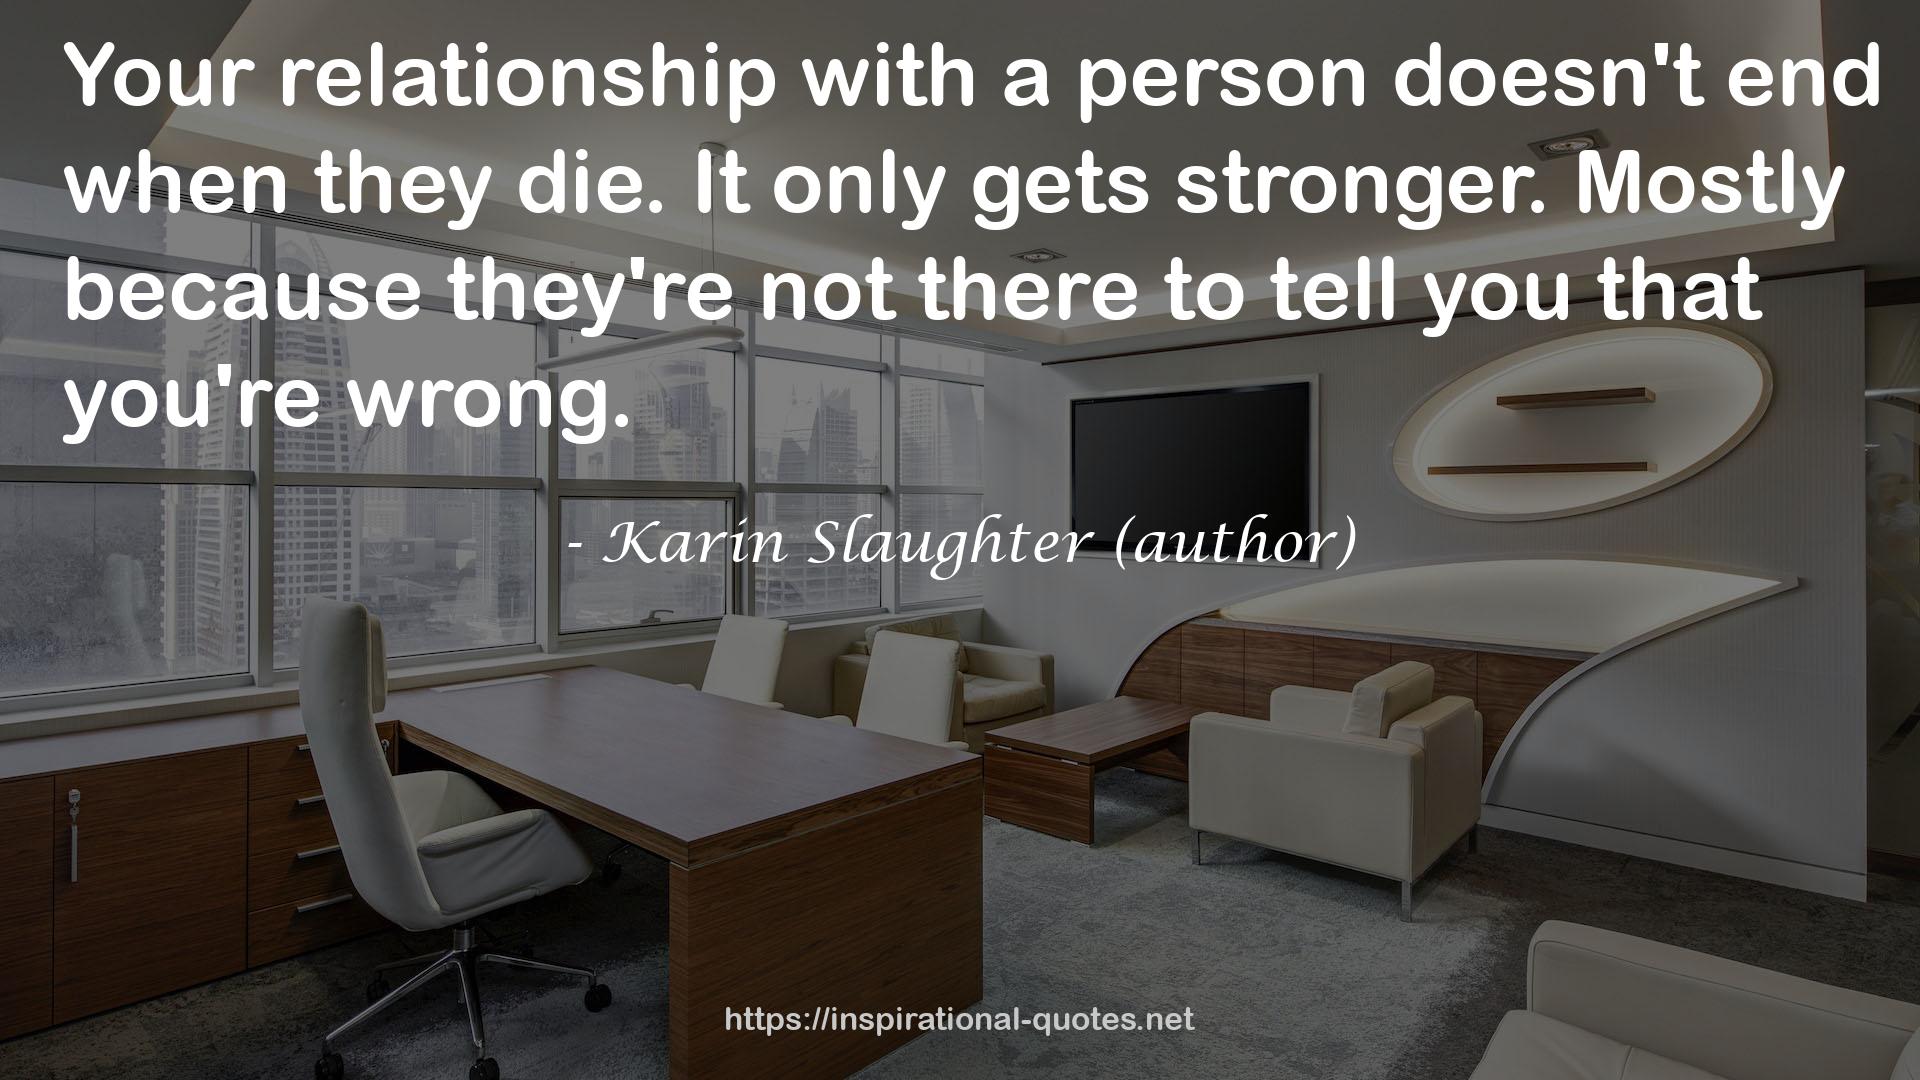 Karin Slaughter (author) QUOTES